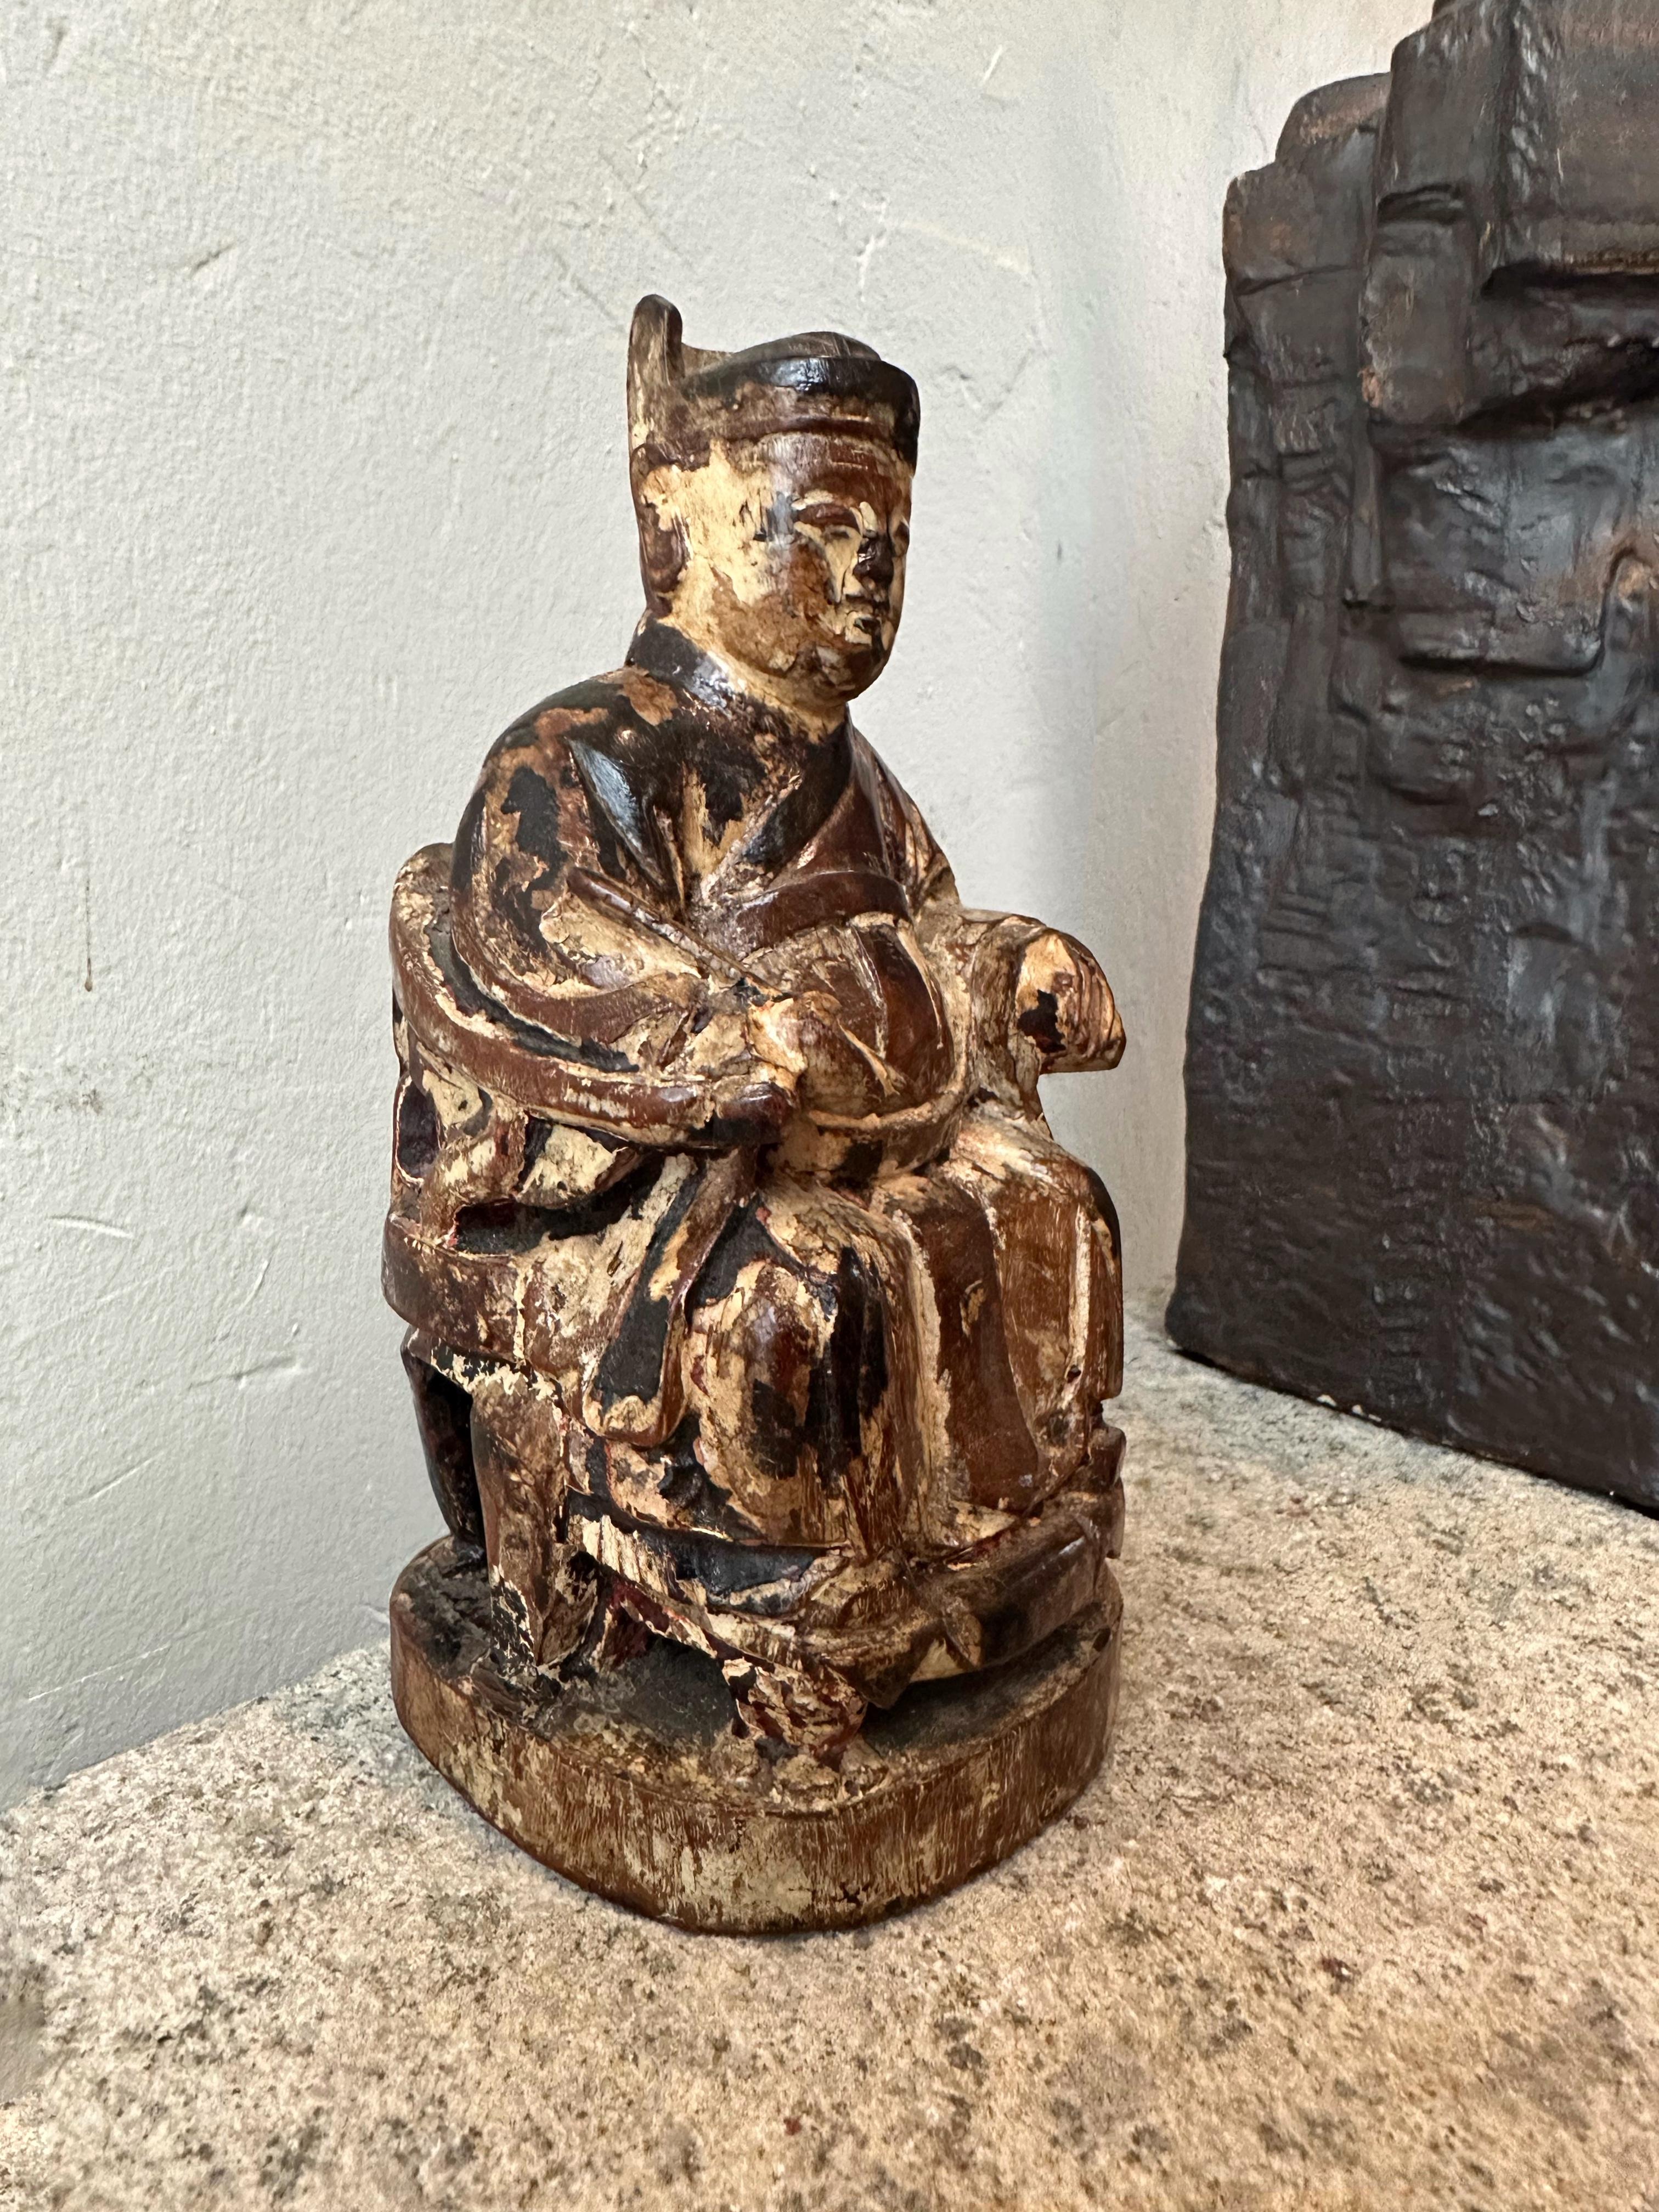 A handsome wooden figure of the Kitchen God (灶神 in Chinese, pronounced zào shén), the Chinese name can also be translated into Stove God. He is a popular ancient deity and was mentioned as early as the Jin period (265-420). The task of the Kitchen